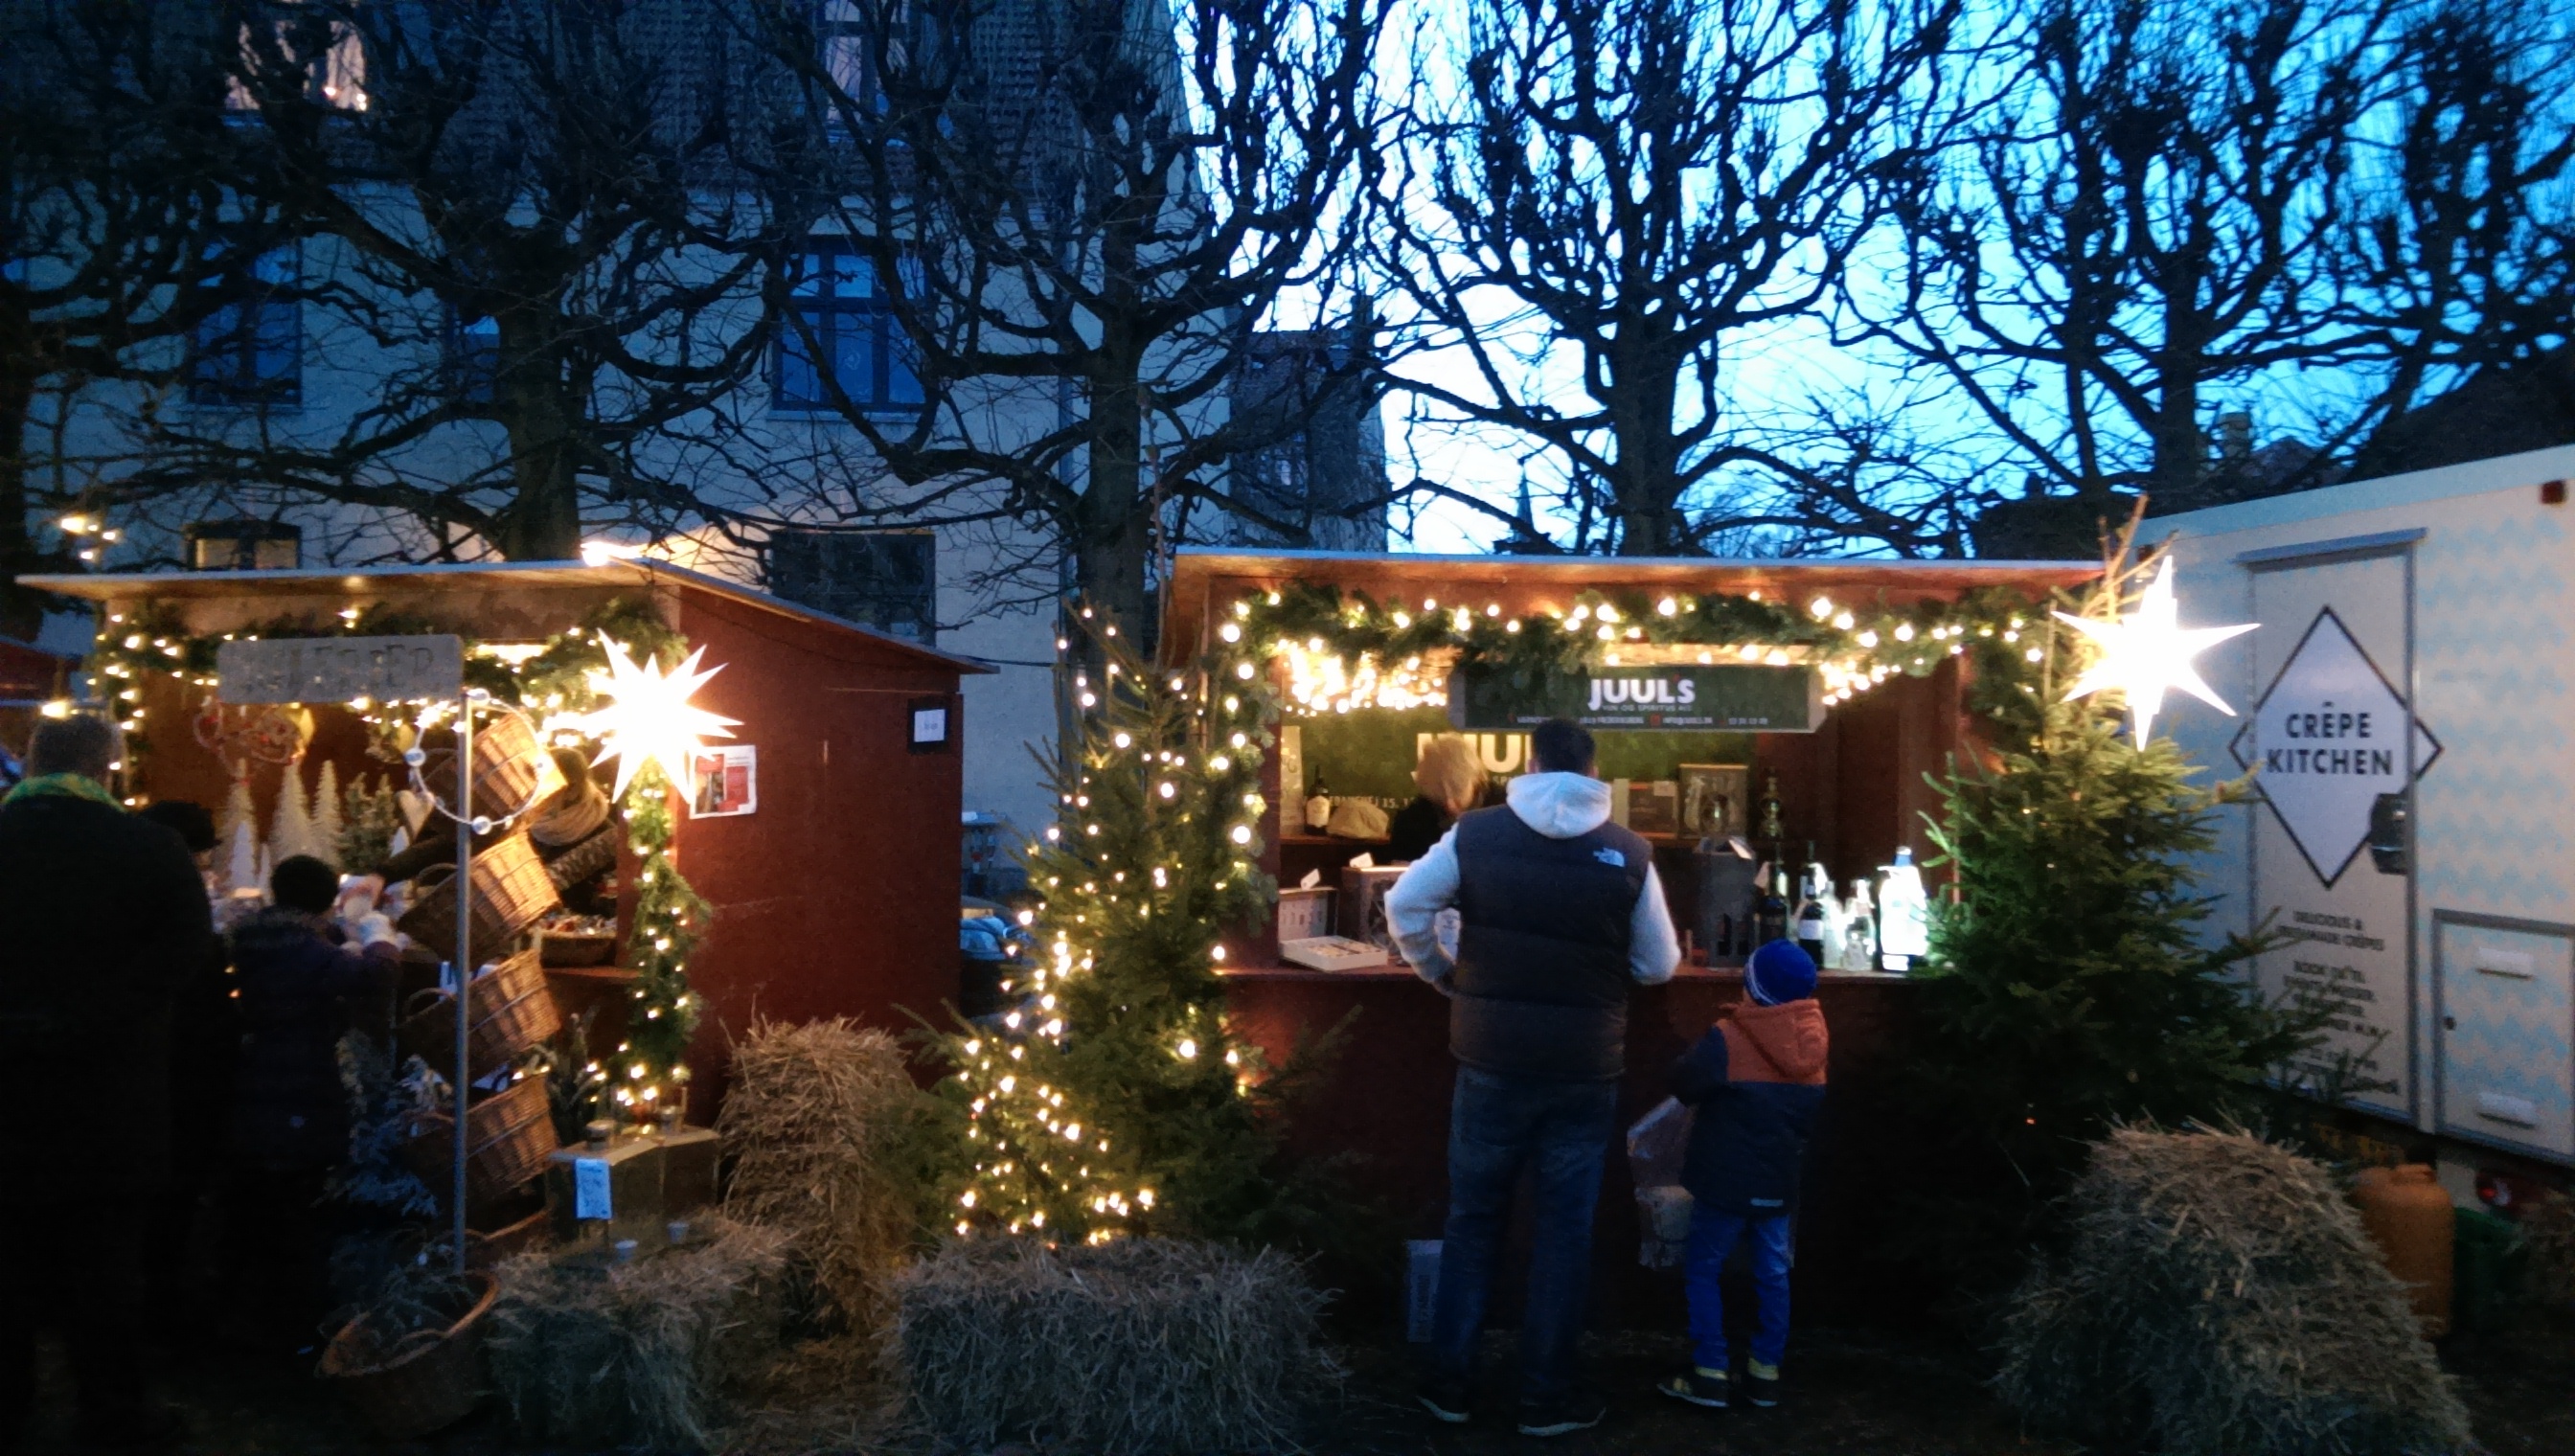 The Christmas market in Dragør 2021